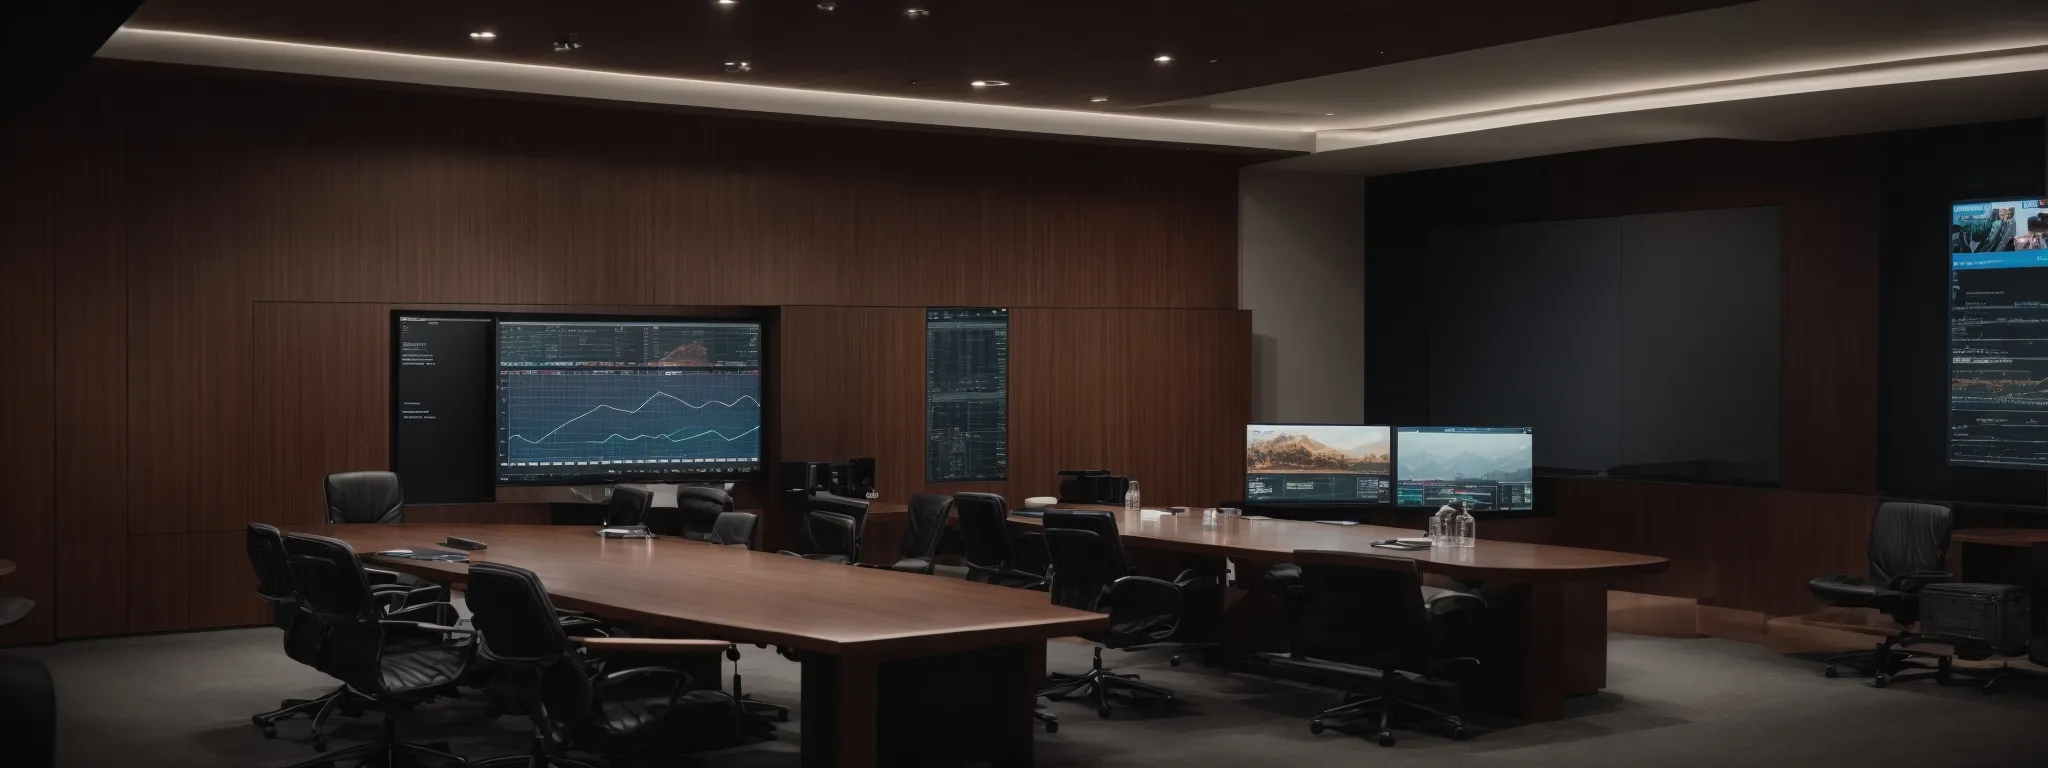 a professional meeting room with a large monitor displaying graphs and performance metrics.